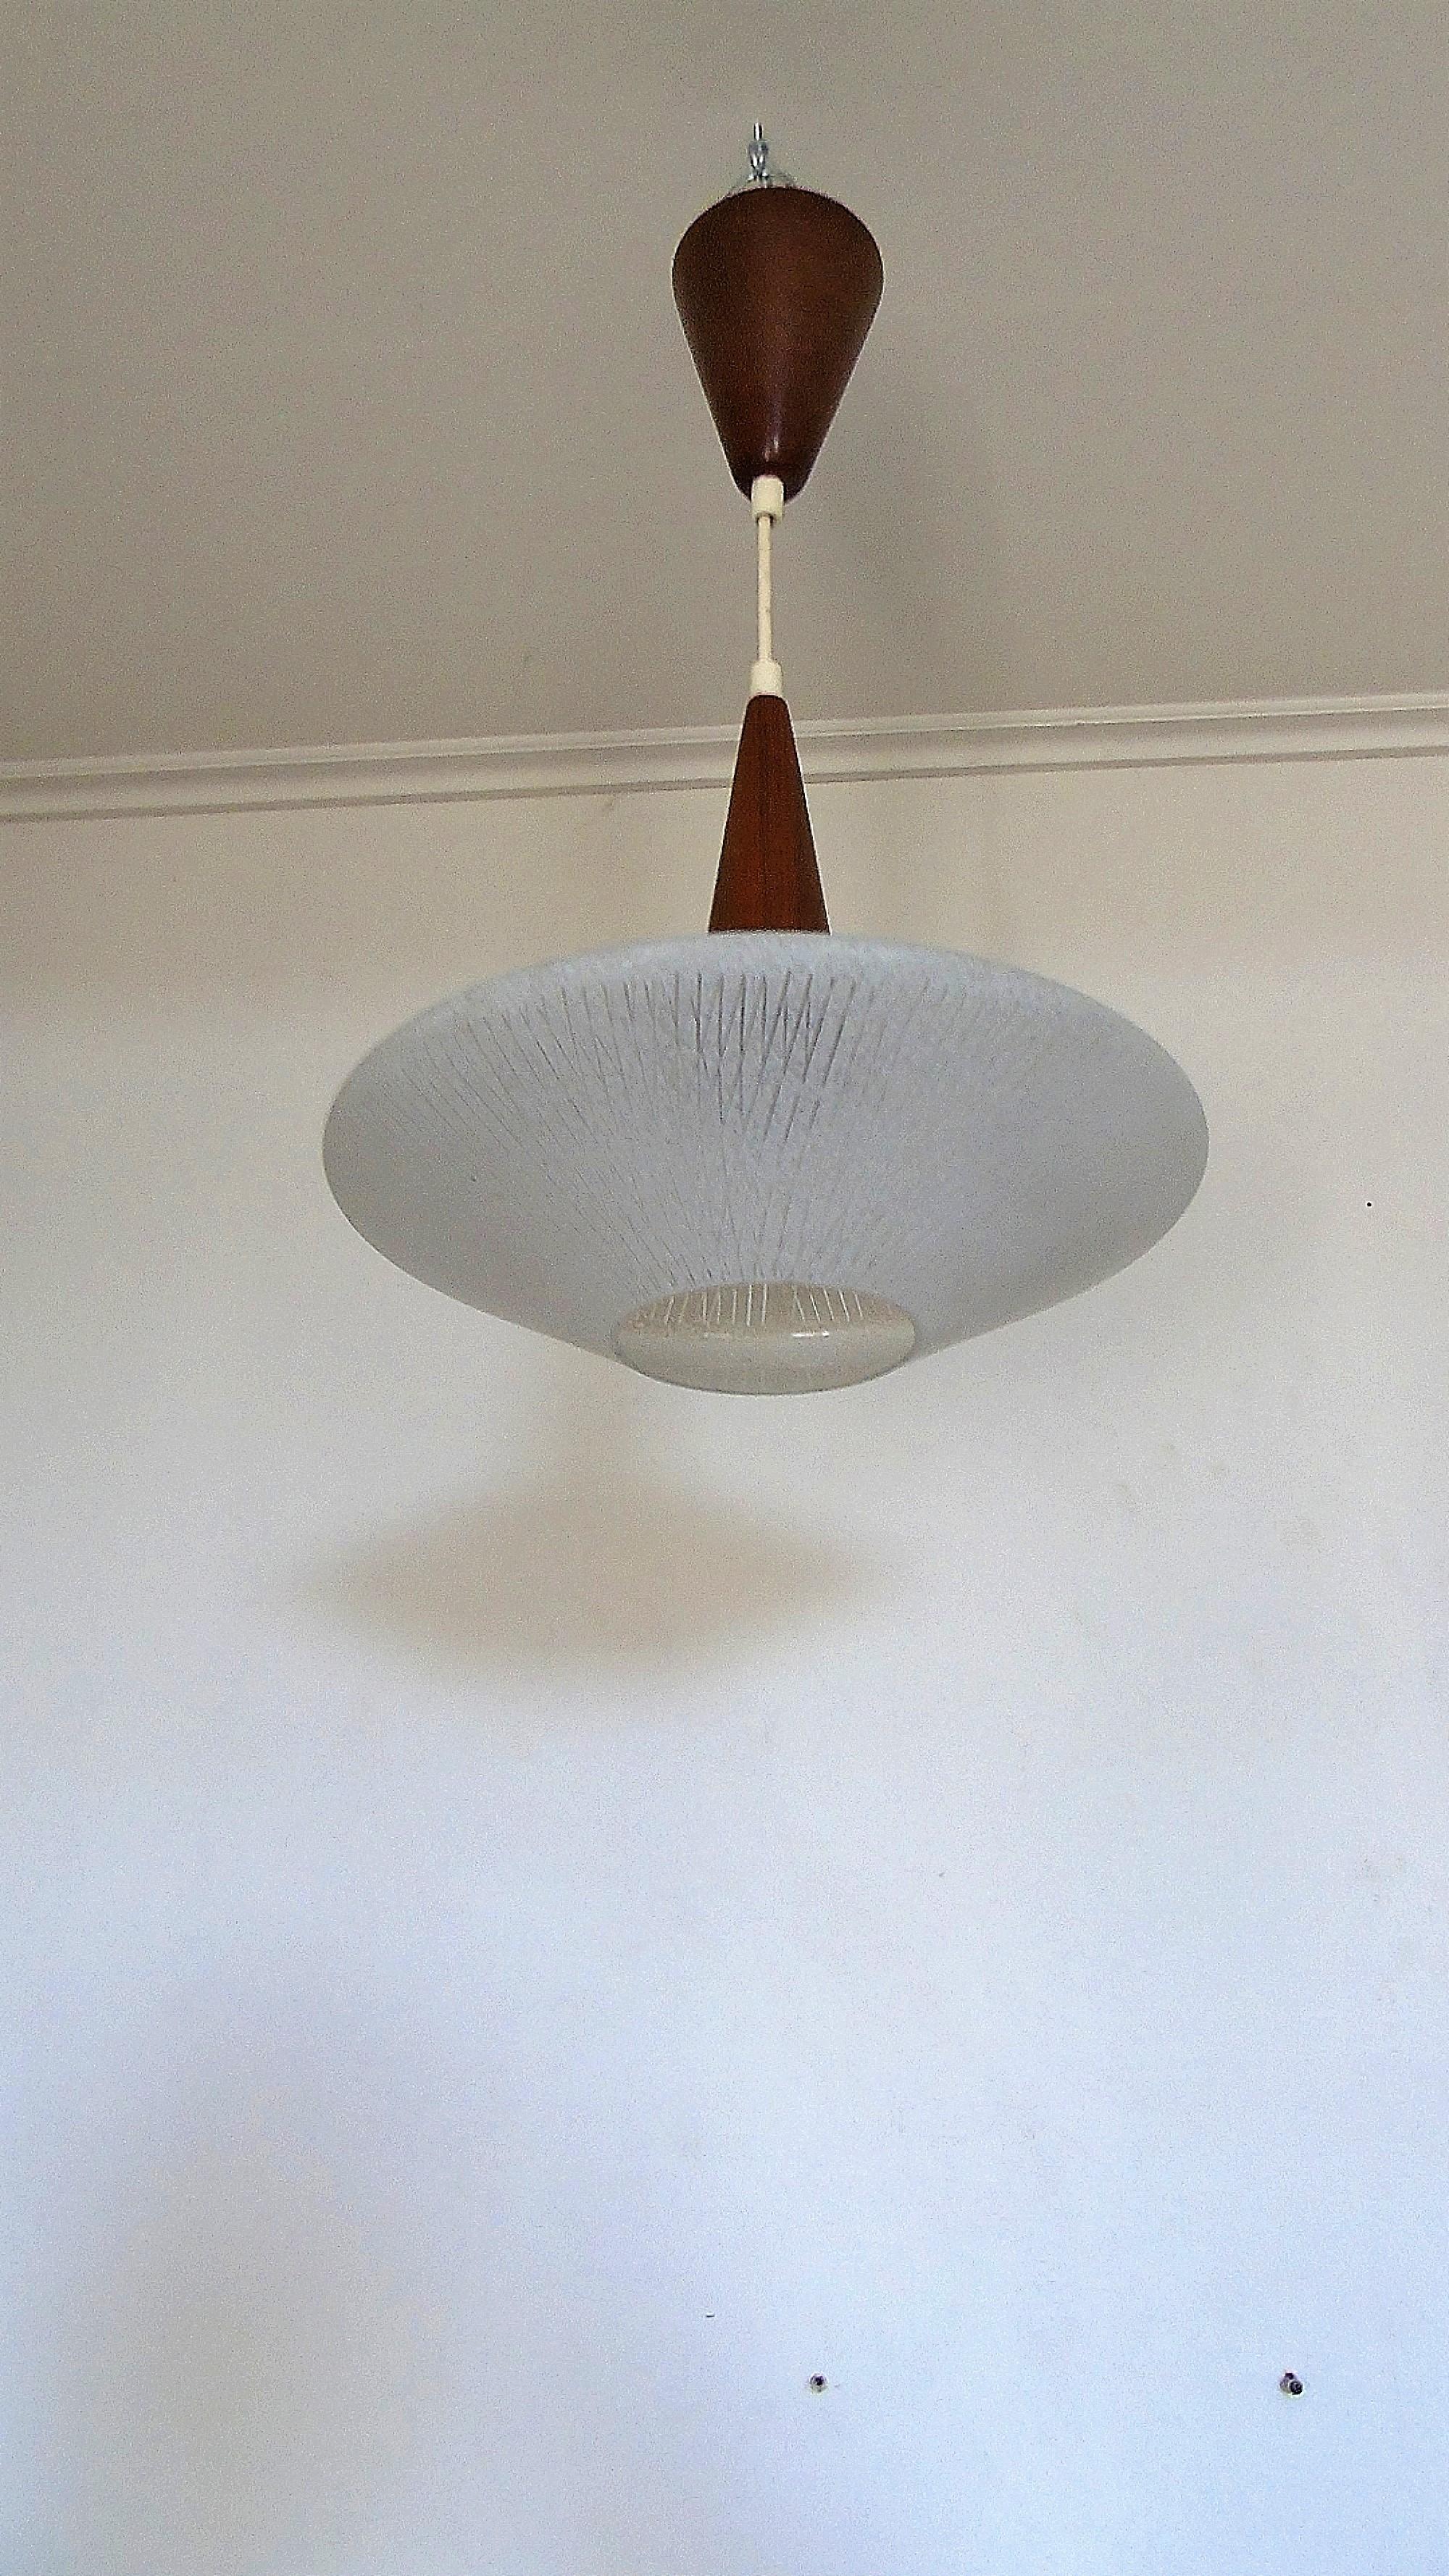 Beautiful Scandinavian teak and glass pendant light.

The glass is designed in a way to emit a diffuse light.

Good condition, no chips to the glass.

Tested and ready for use with a regular E26/E27 light bulb.

Denmark,